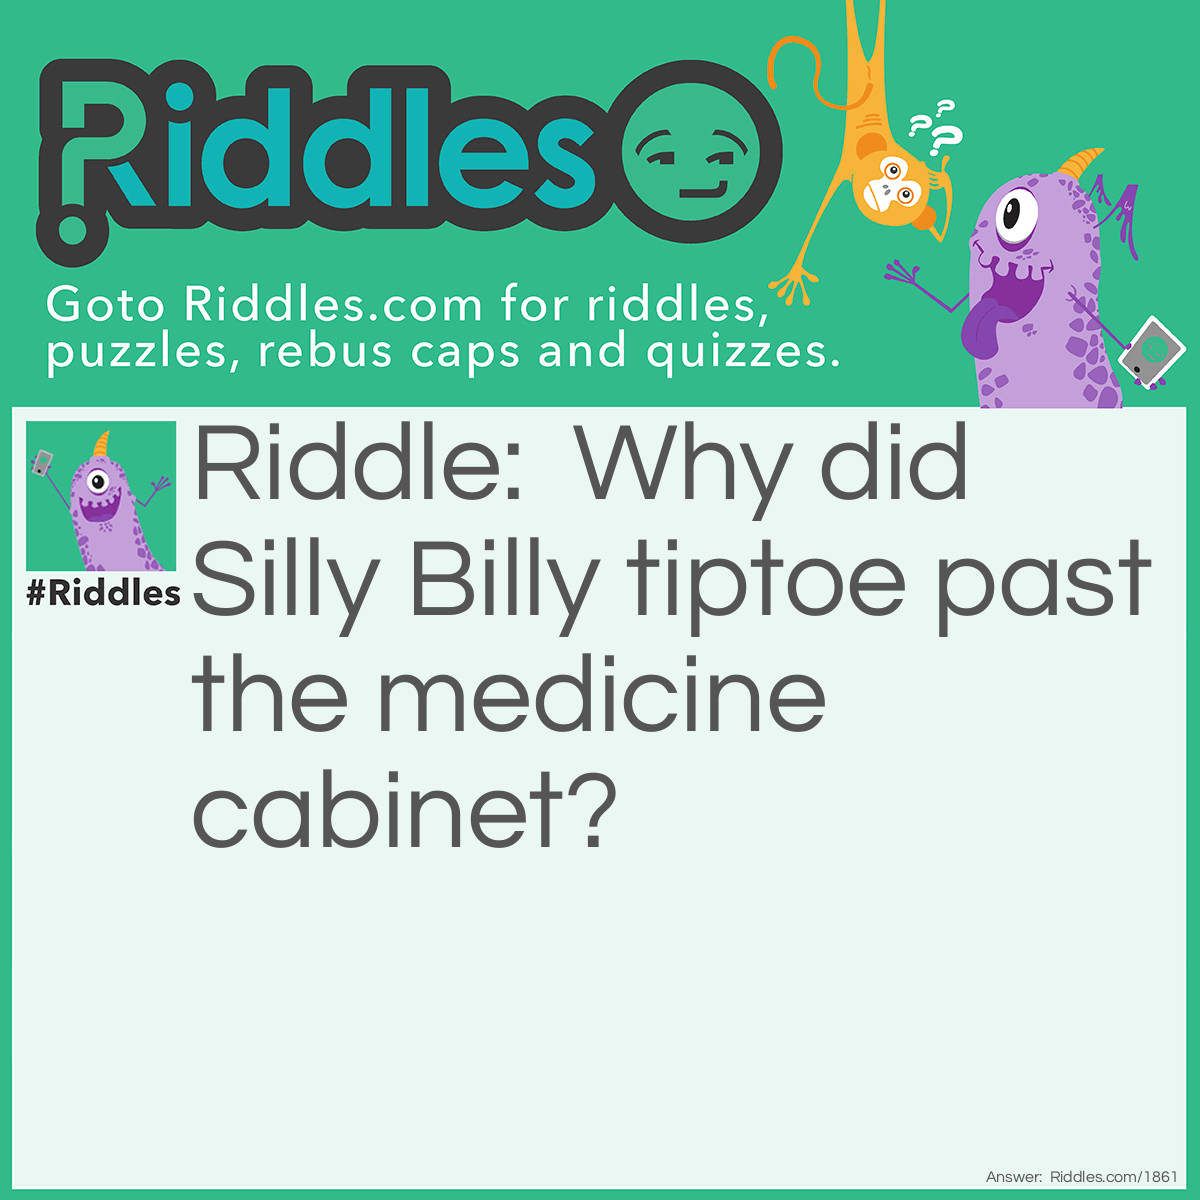 Riddle: Why did <a href="../../../funny-riddles">Silly</a> Billy tiptoe past the medicine cabinet? Answer: He didn't want to wake up the sleeping pills.